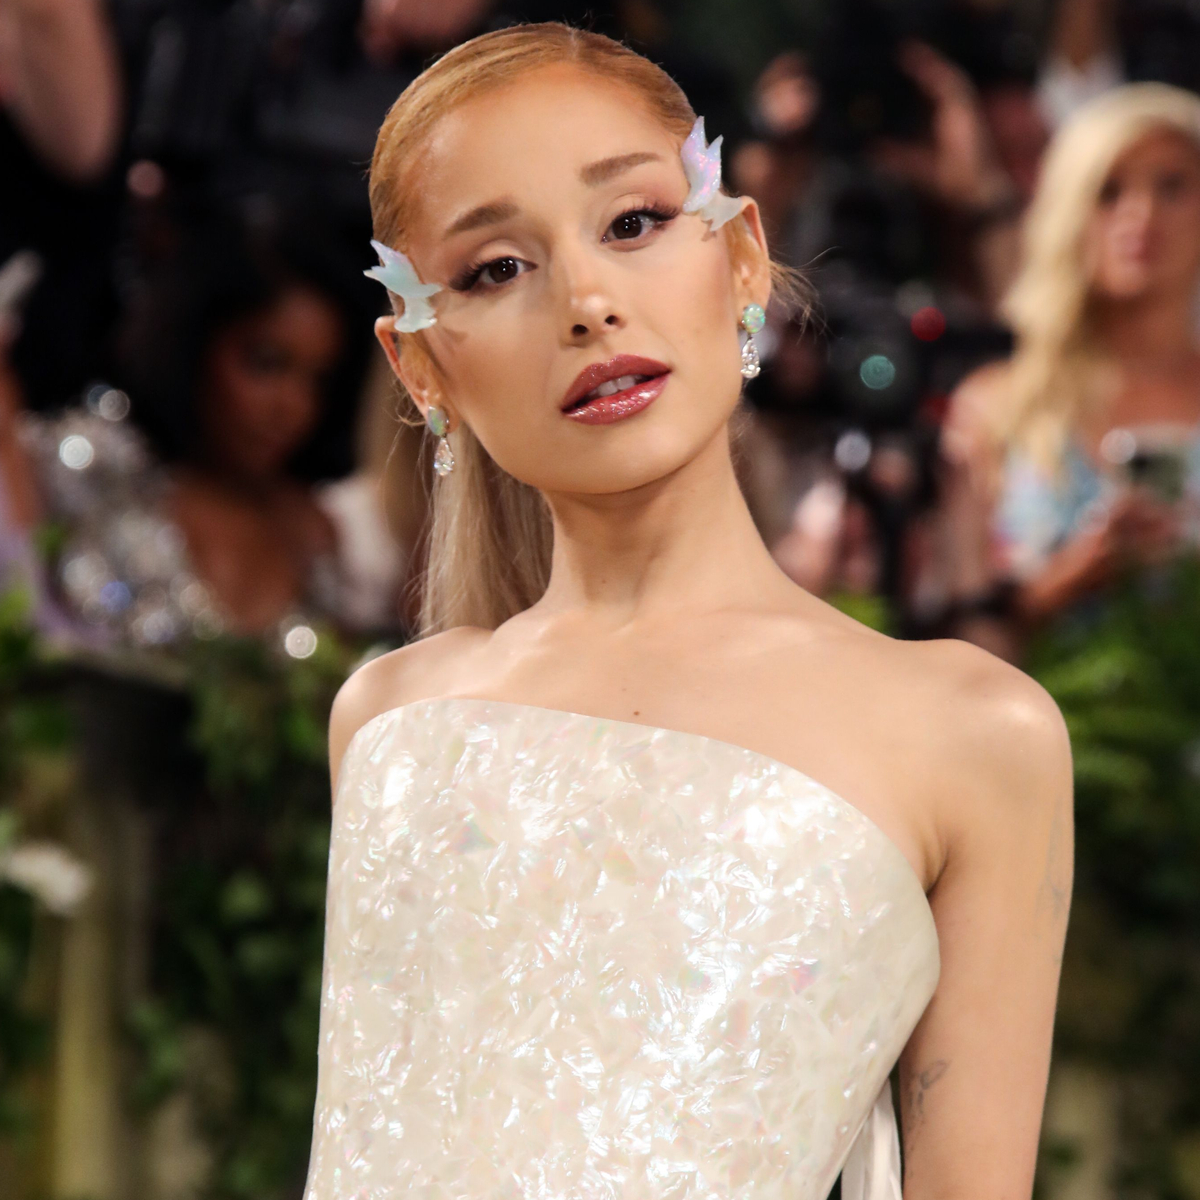 Ariana Grande Claps Back at Haters Over Her Voice Change